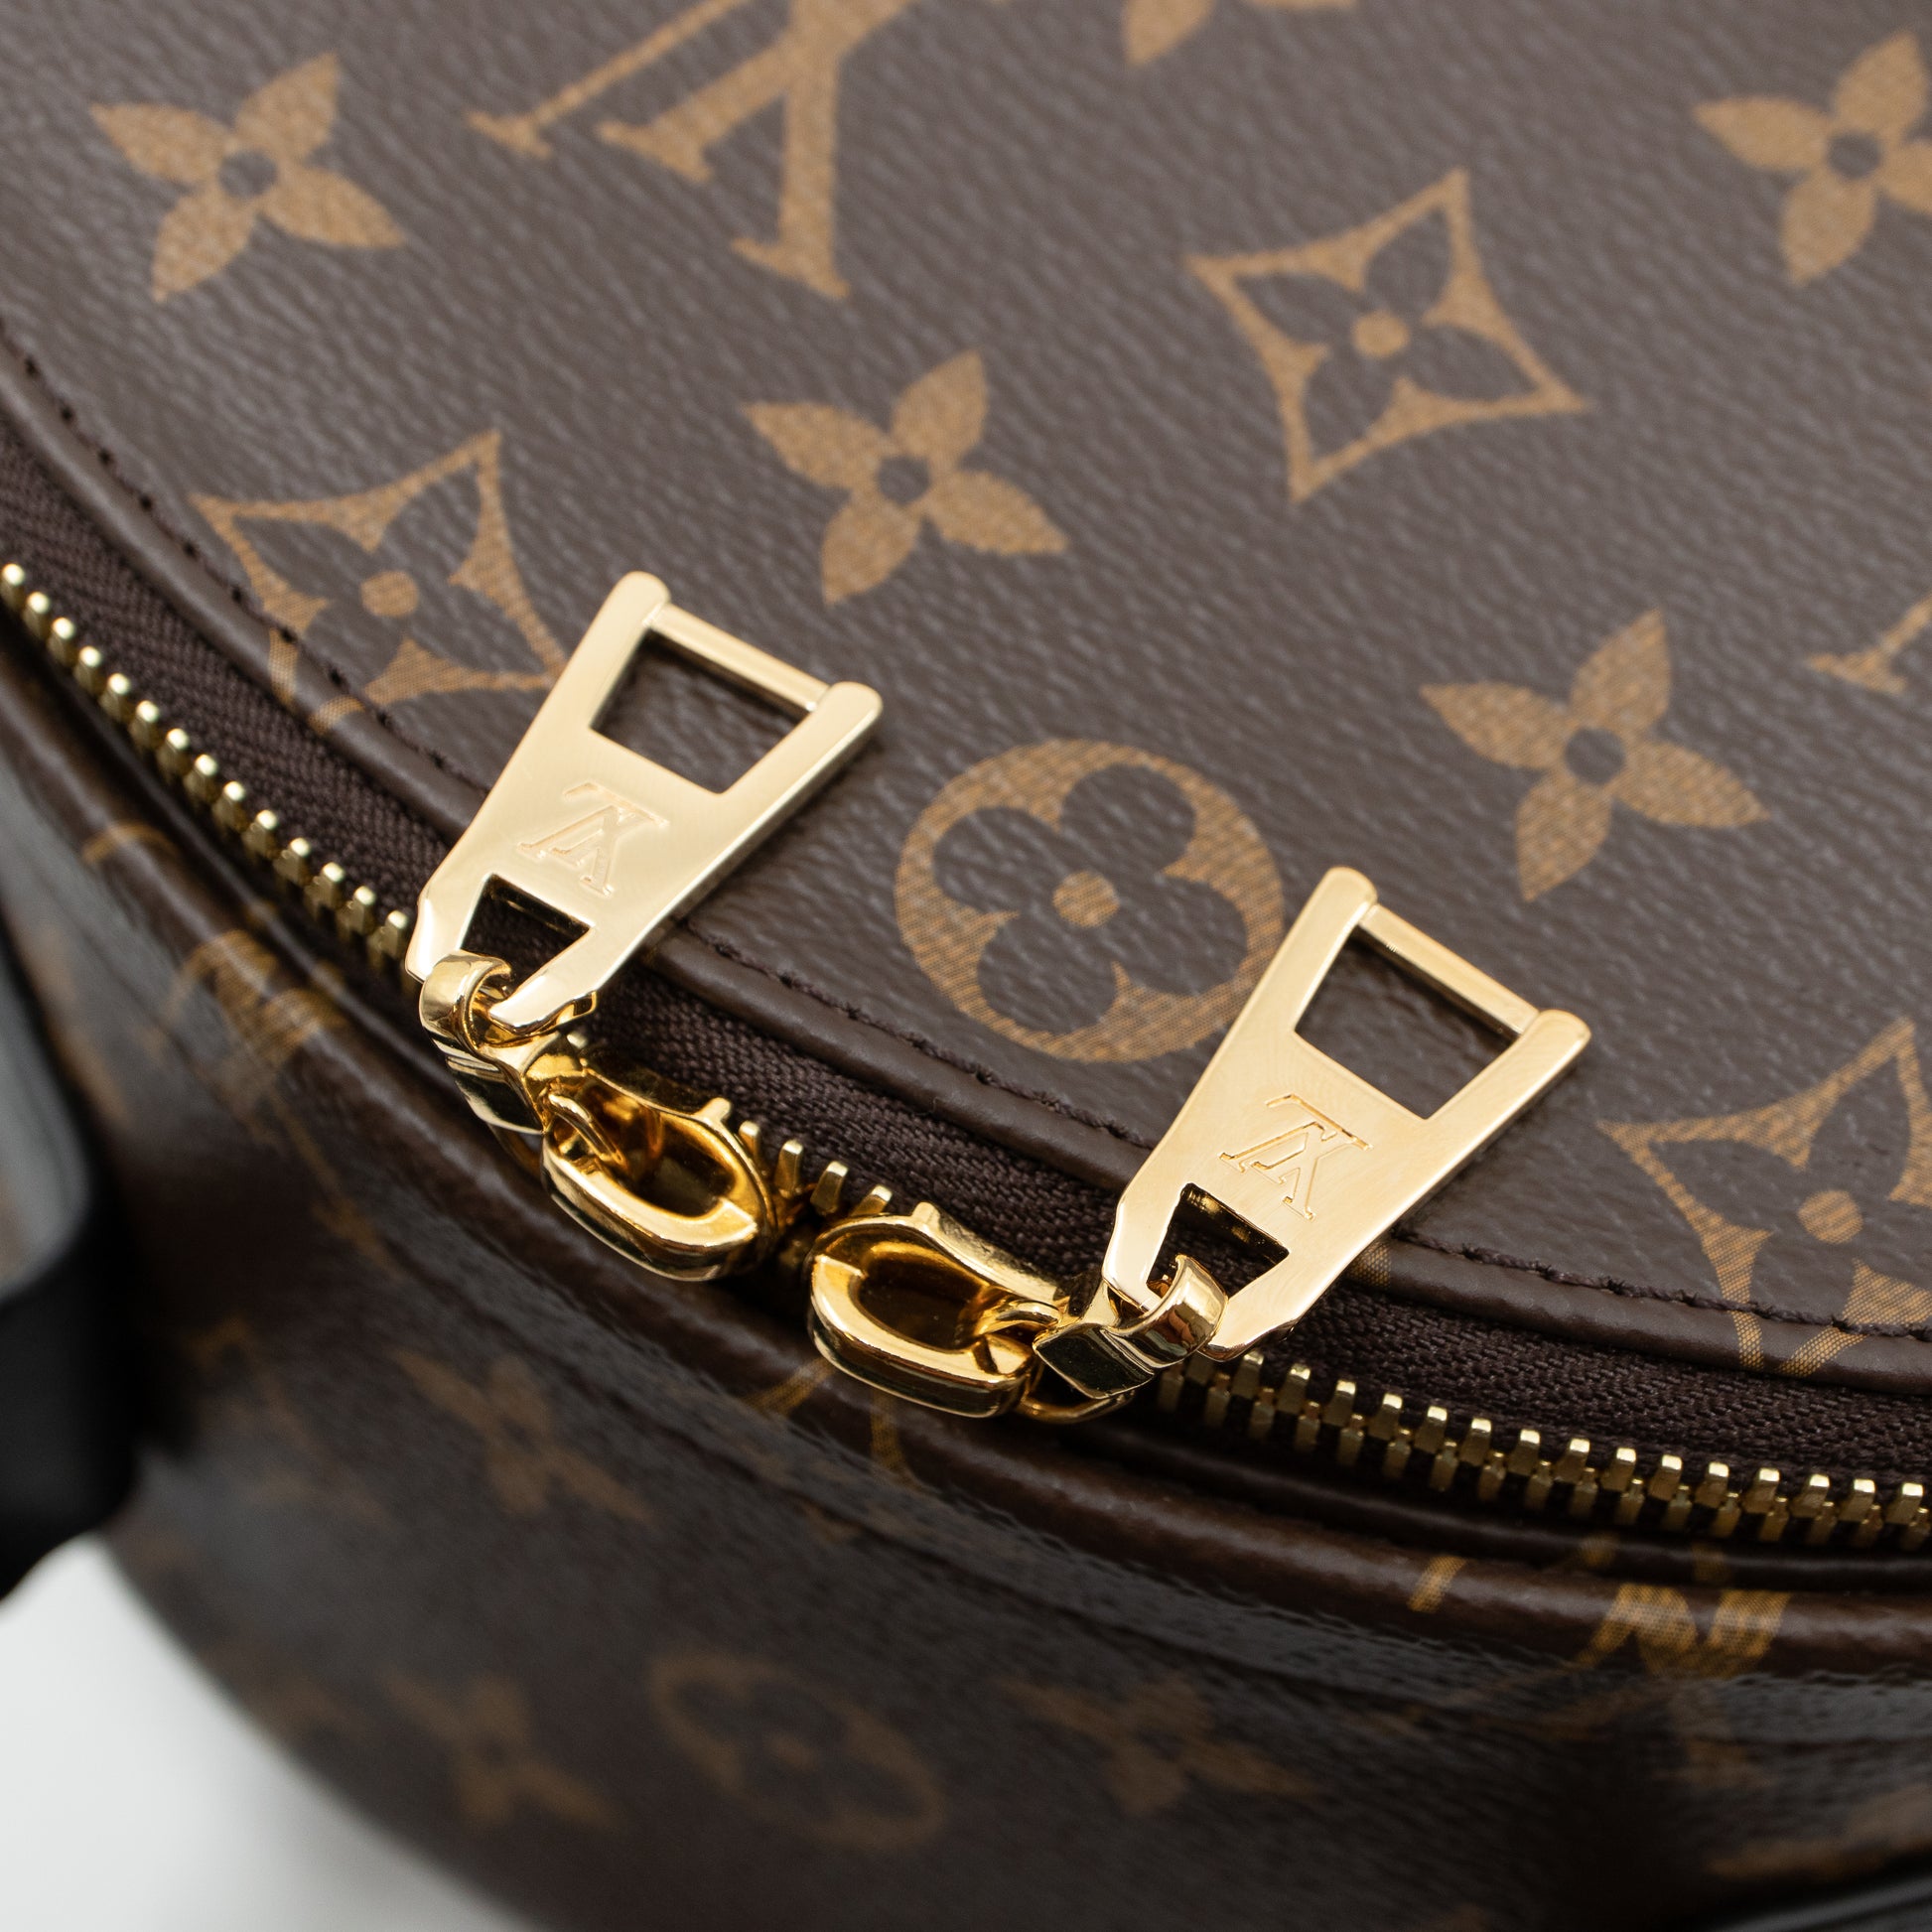 LOUIS VUITTON Monogram Palm Spring MM Backpack – GHW